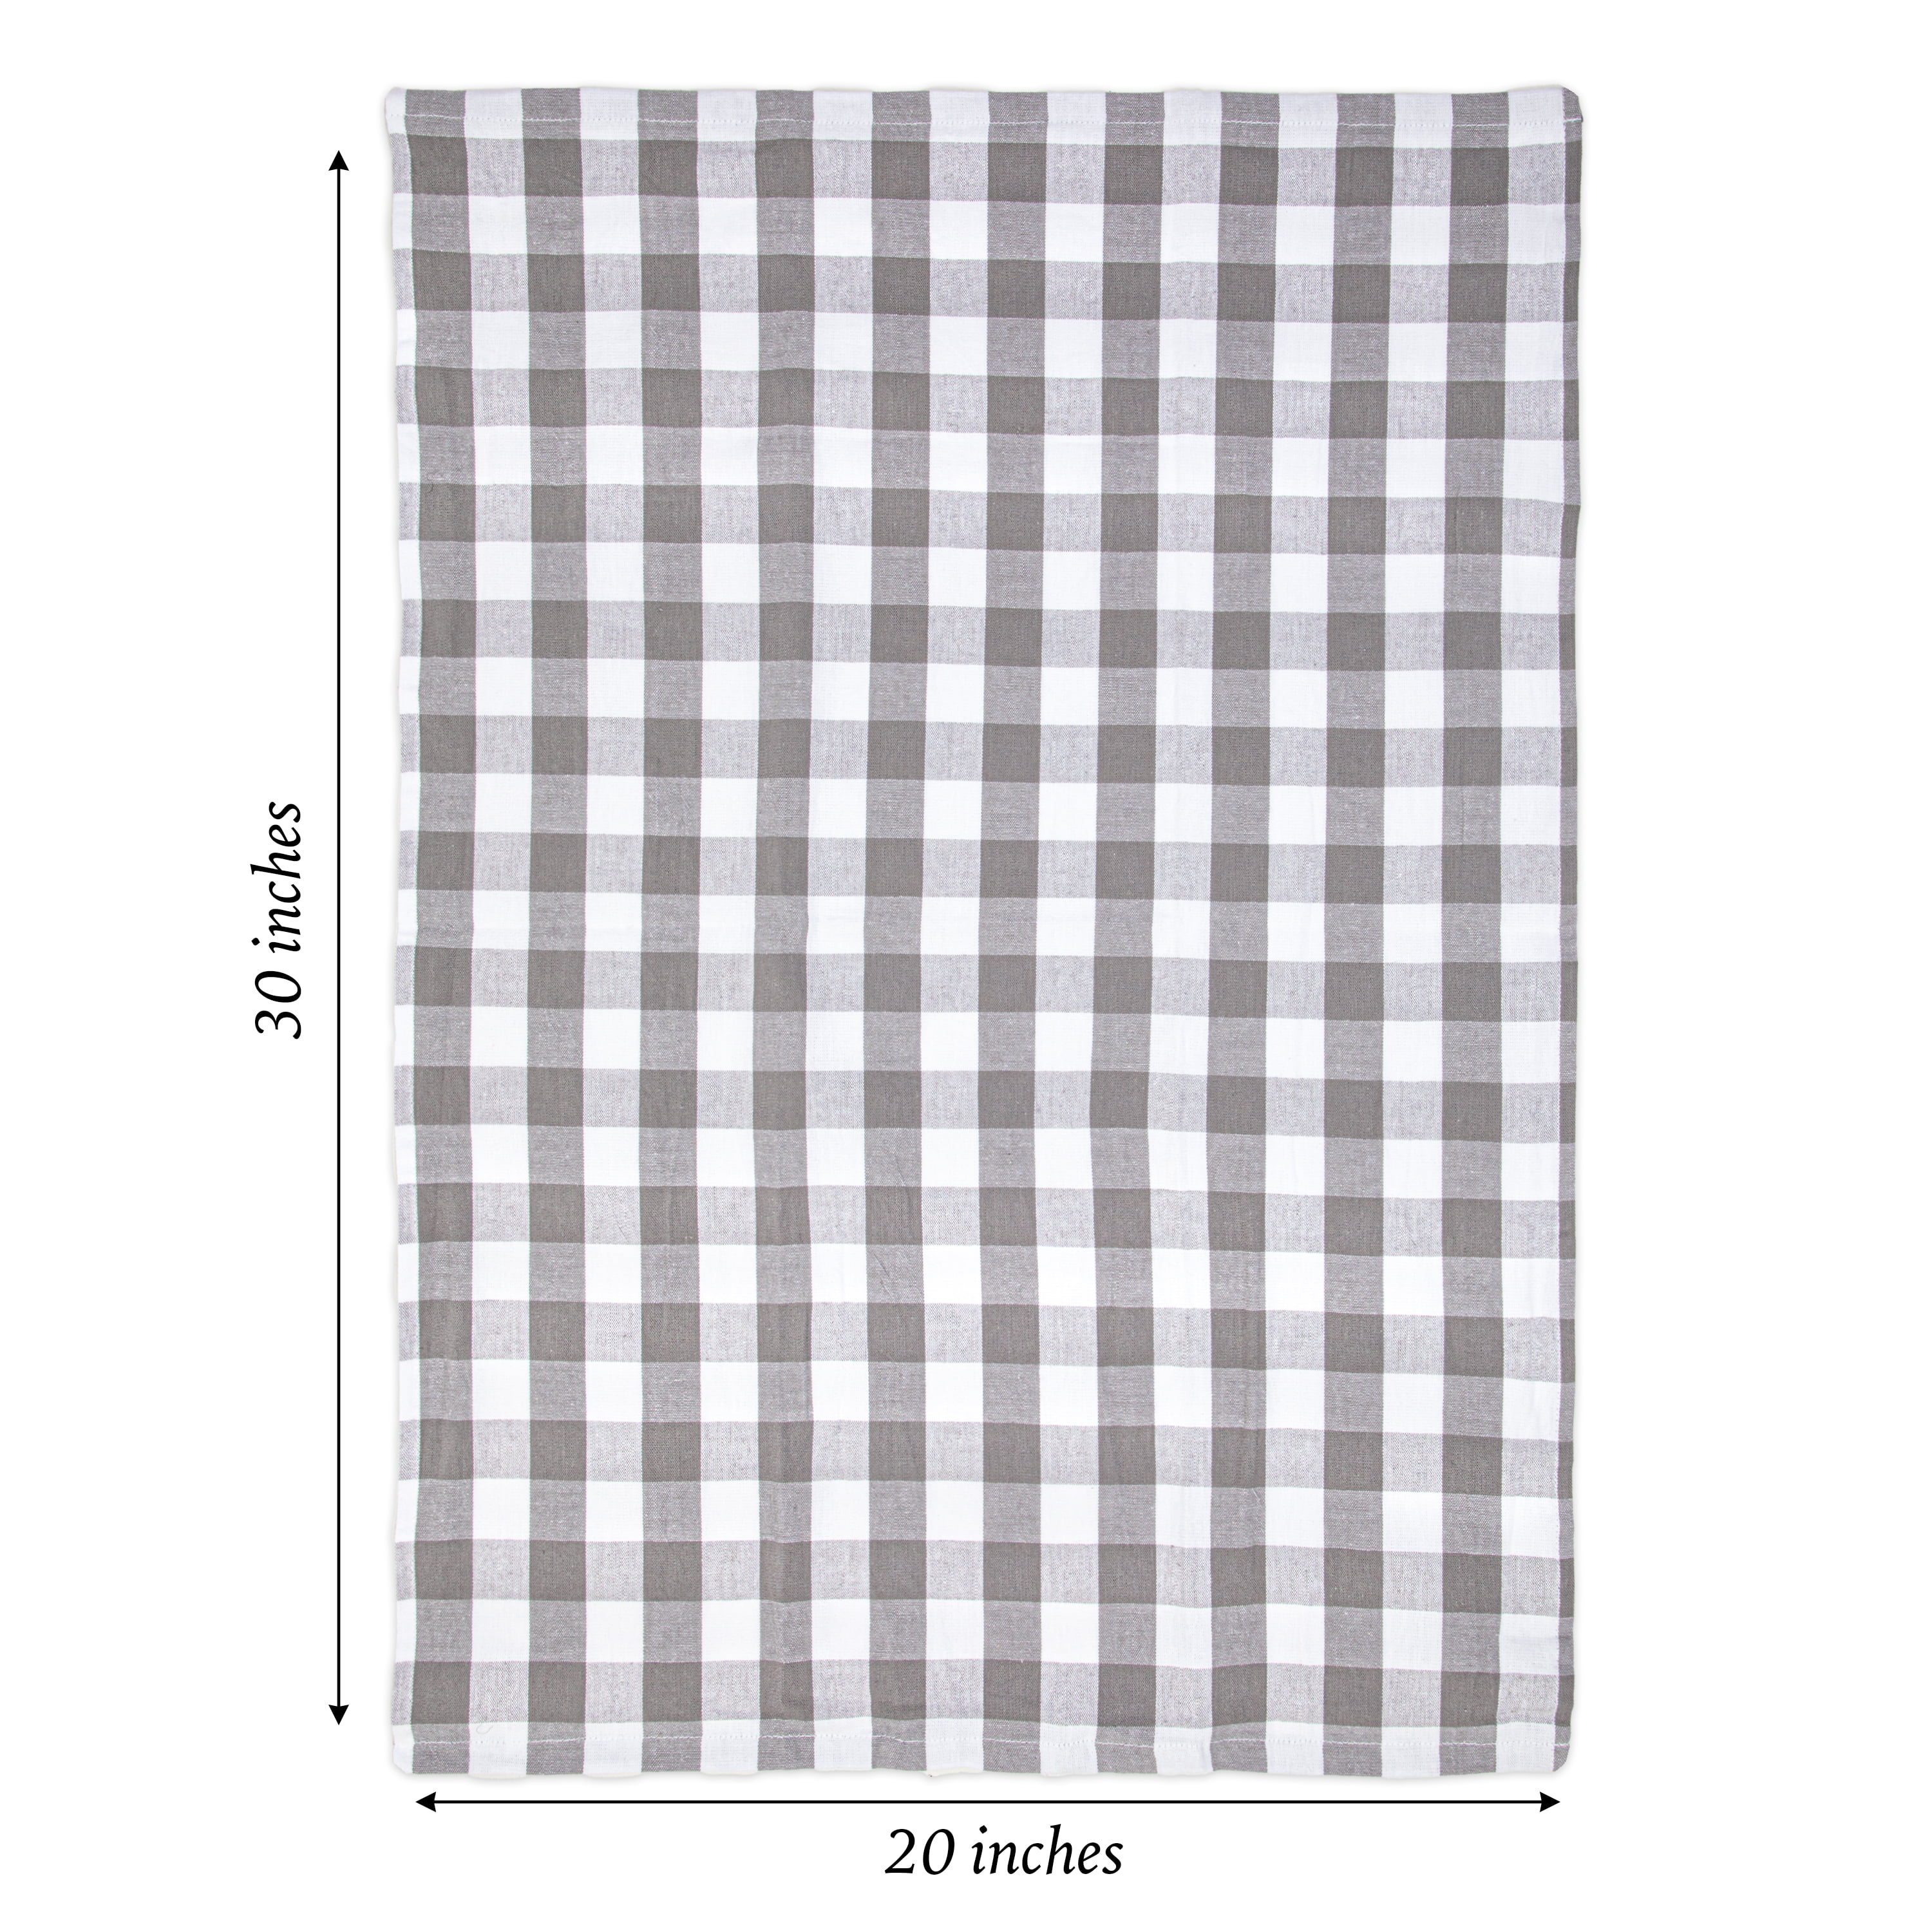 All Cotton and Linen Kitchen Towels, Cotton Dish Towels - Farmhouse Hand Towels, Buffalo Plaid Dish Towels Set of 6 16 inchx27 inch (Gray/White), Size